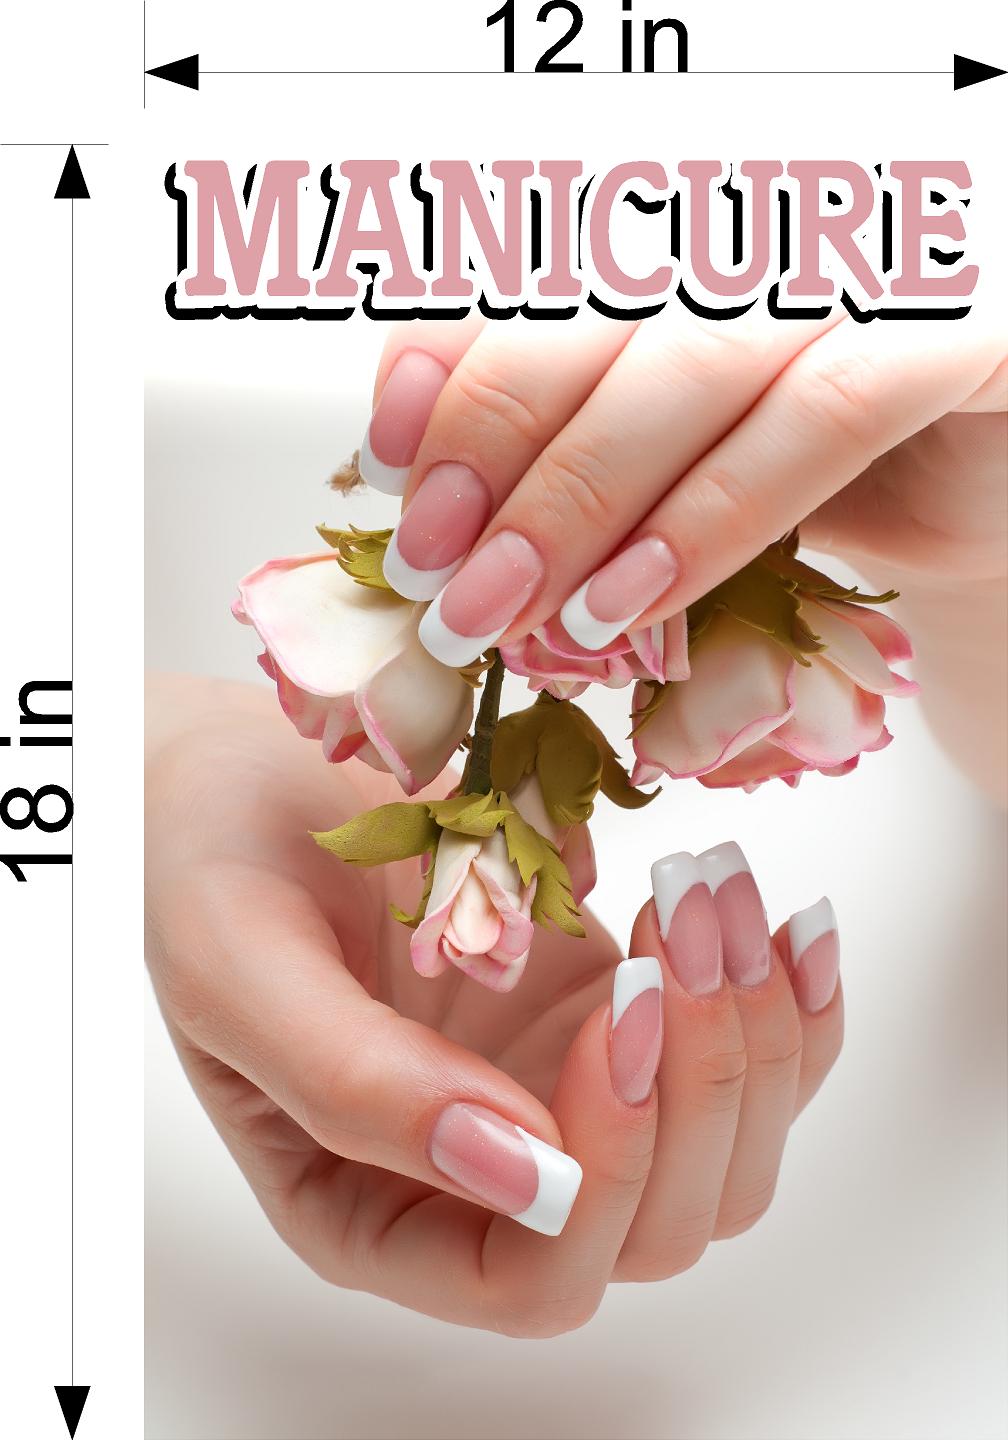 Manicure 09 Wallpaper Poster Decal with Adhesive Backing Wall Sticker Decor Indoors Interior Sign Vertical